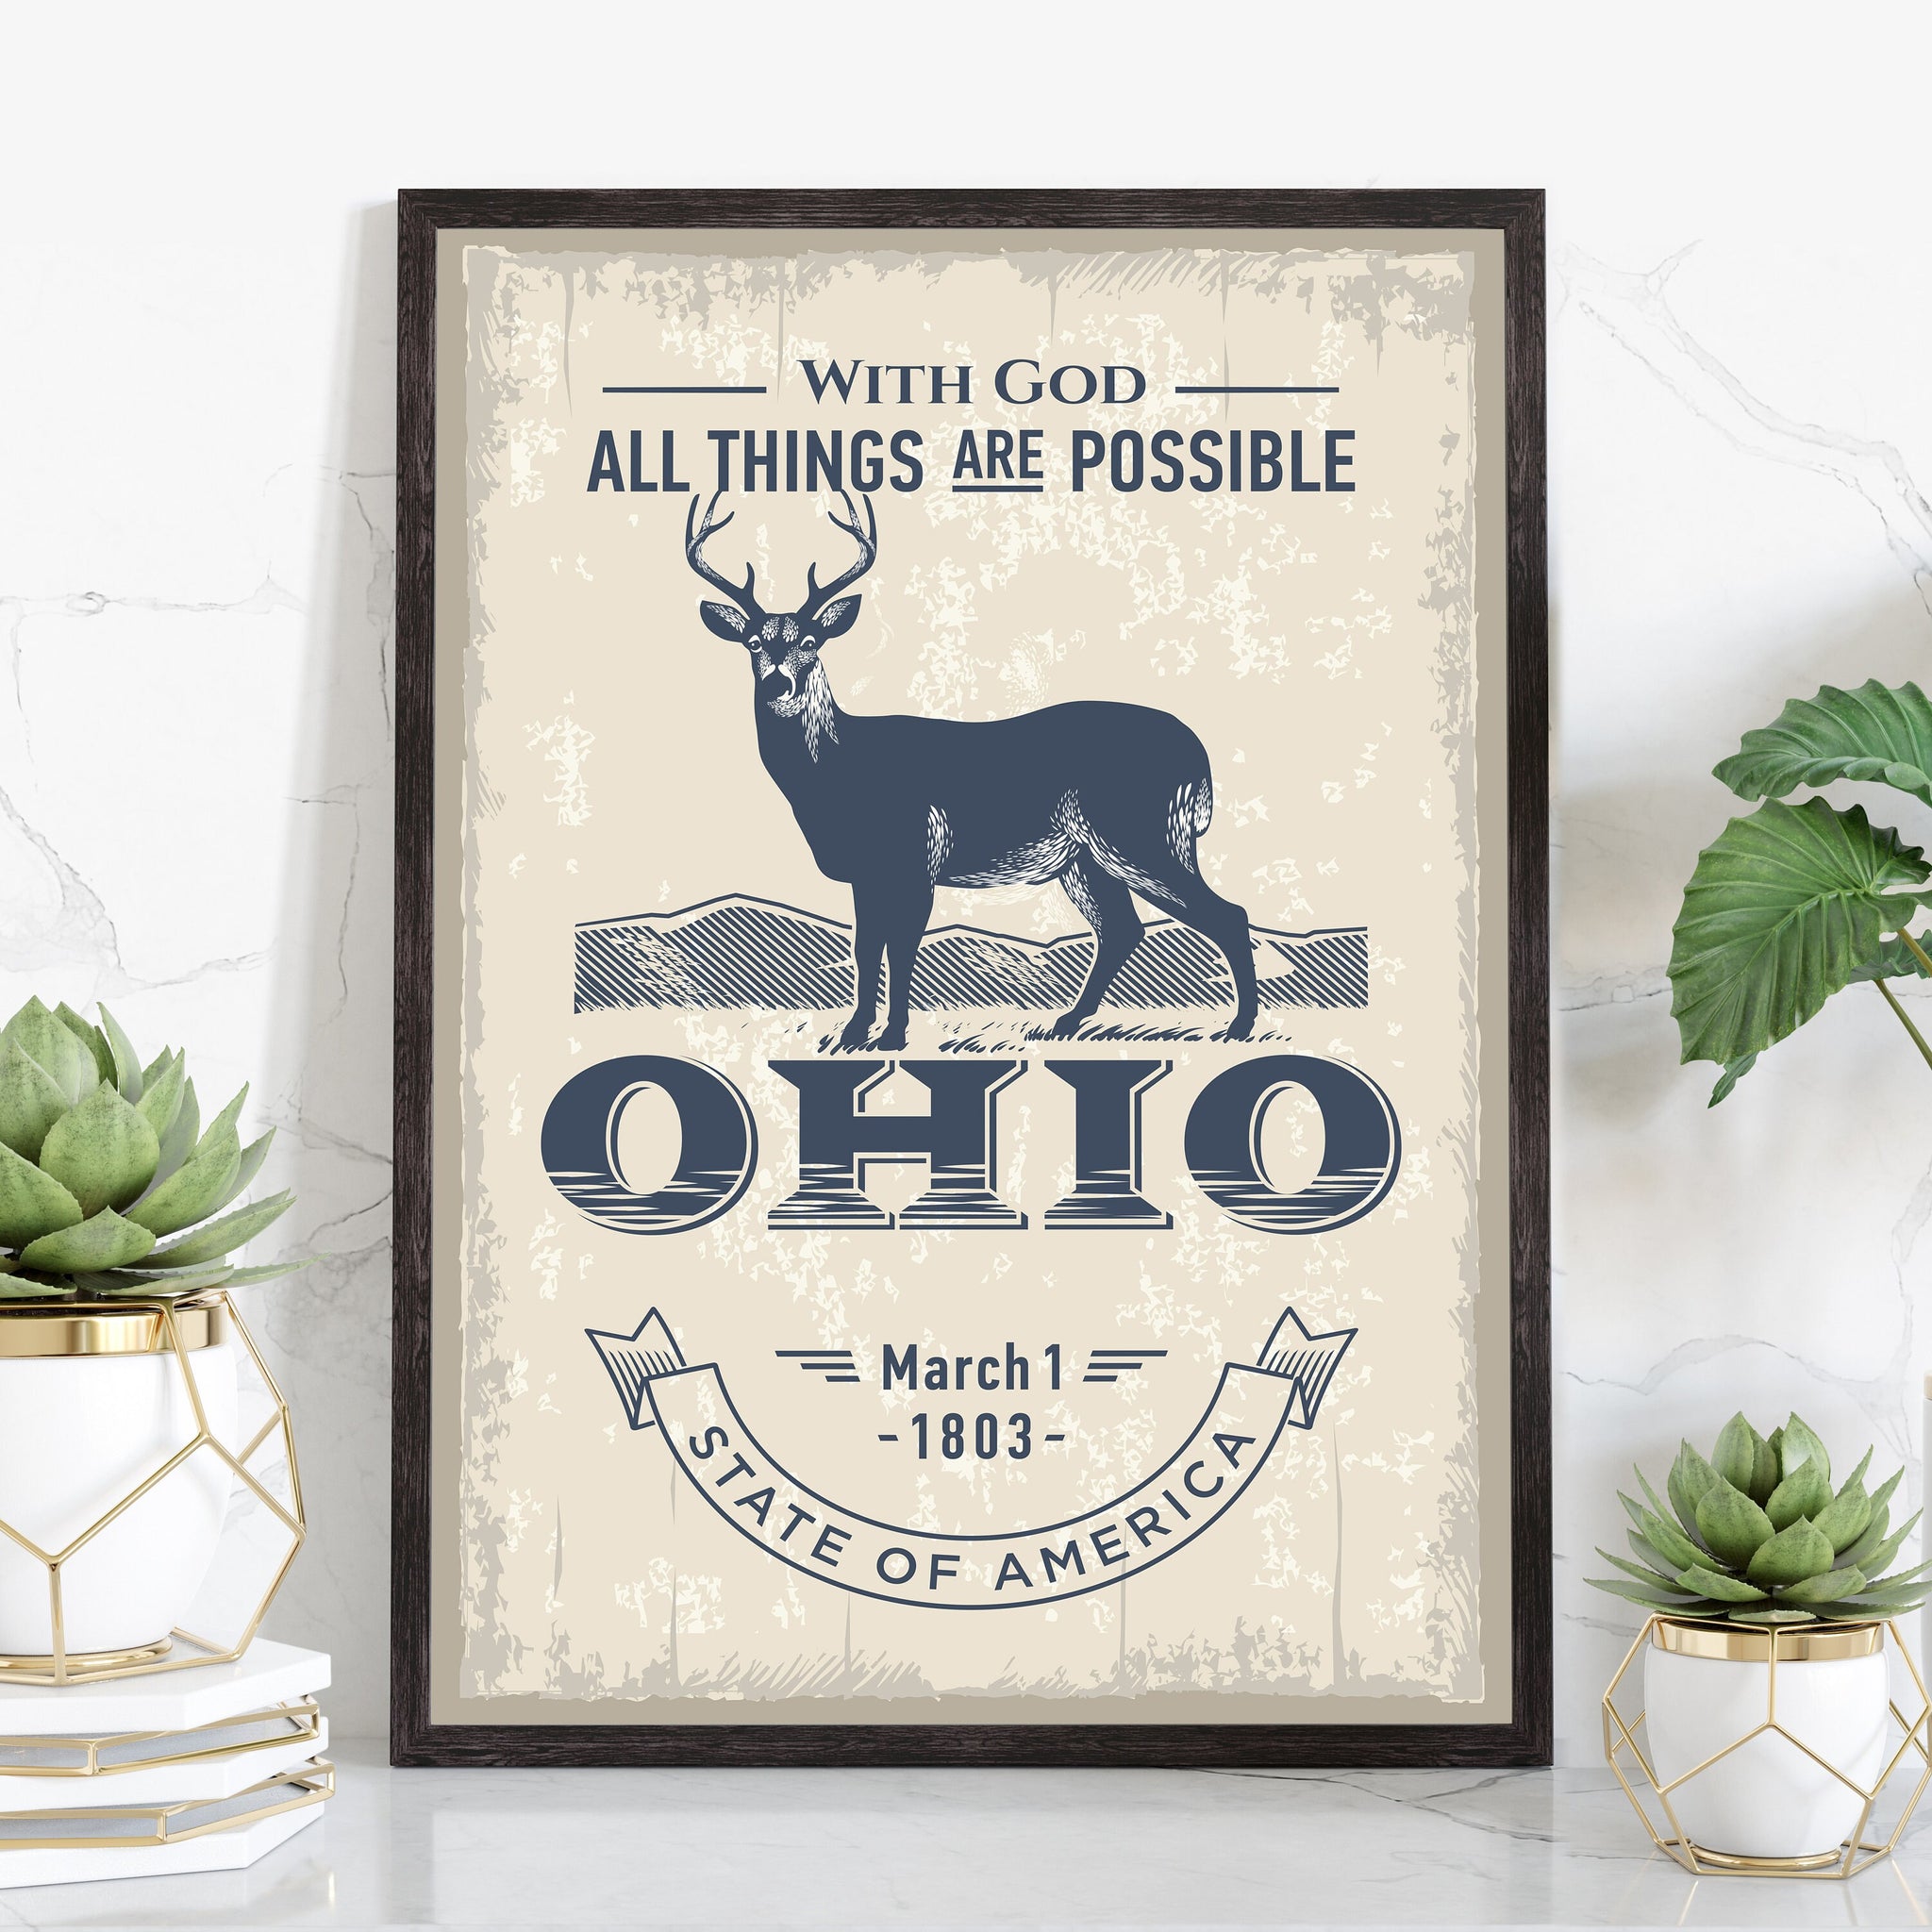 Ohio State Symbol Poster, Ohio State Poster Print, Ohio State Emblem Poster, Retro Travel State Poster, Home and Office Wall Art